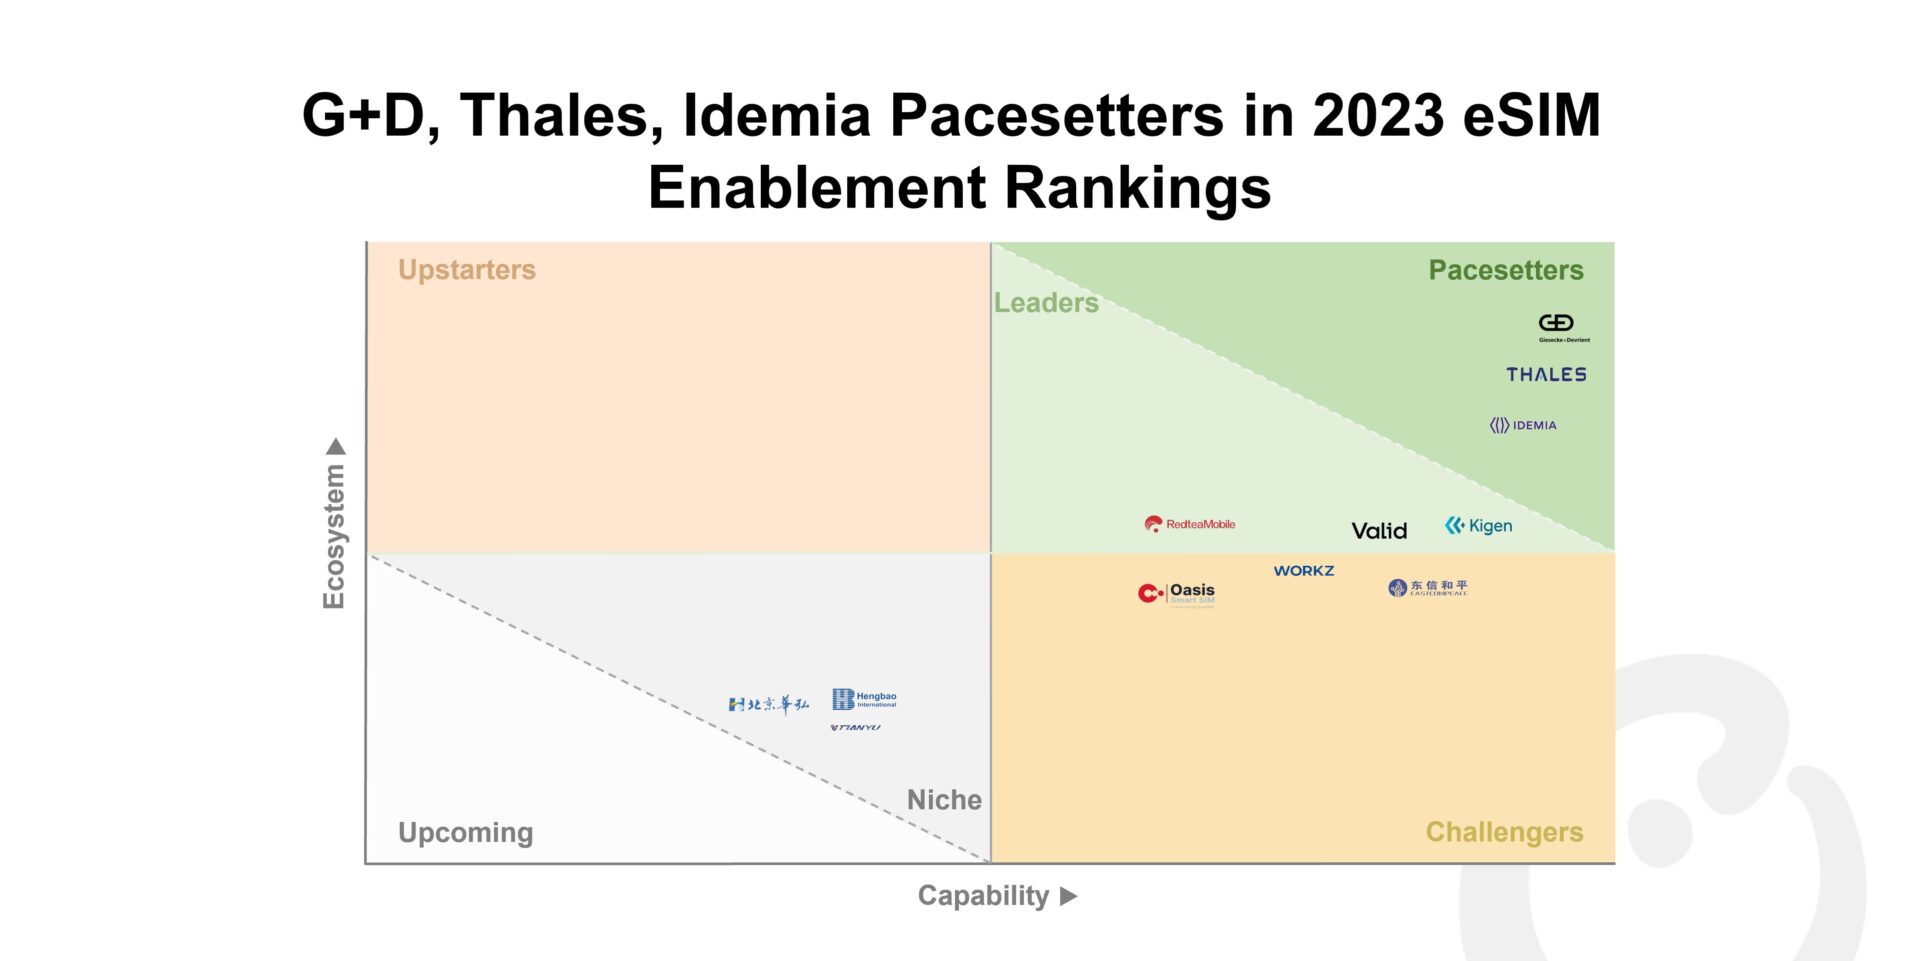 G+D, Thales, Idemia Pacesetters in 2023 eSIM Enablement Rankings